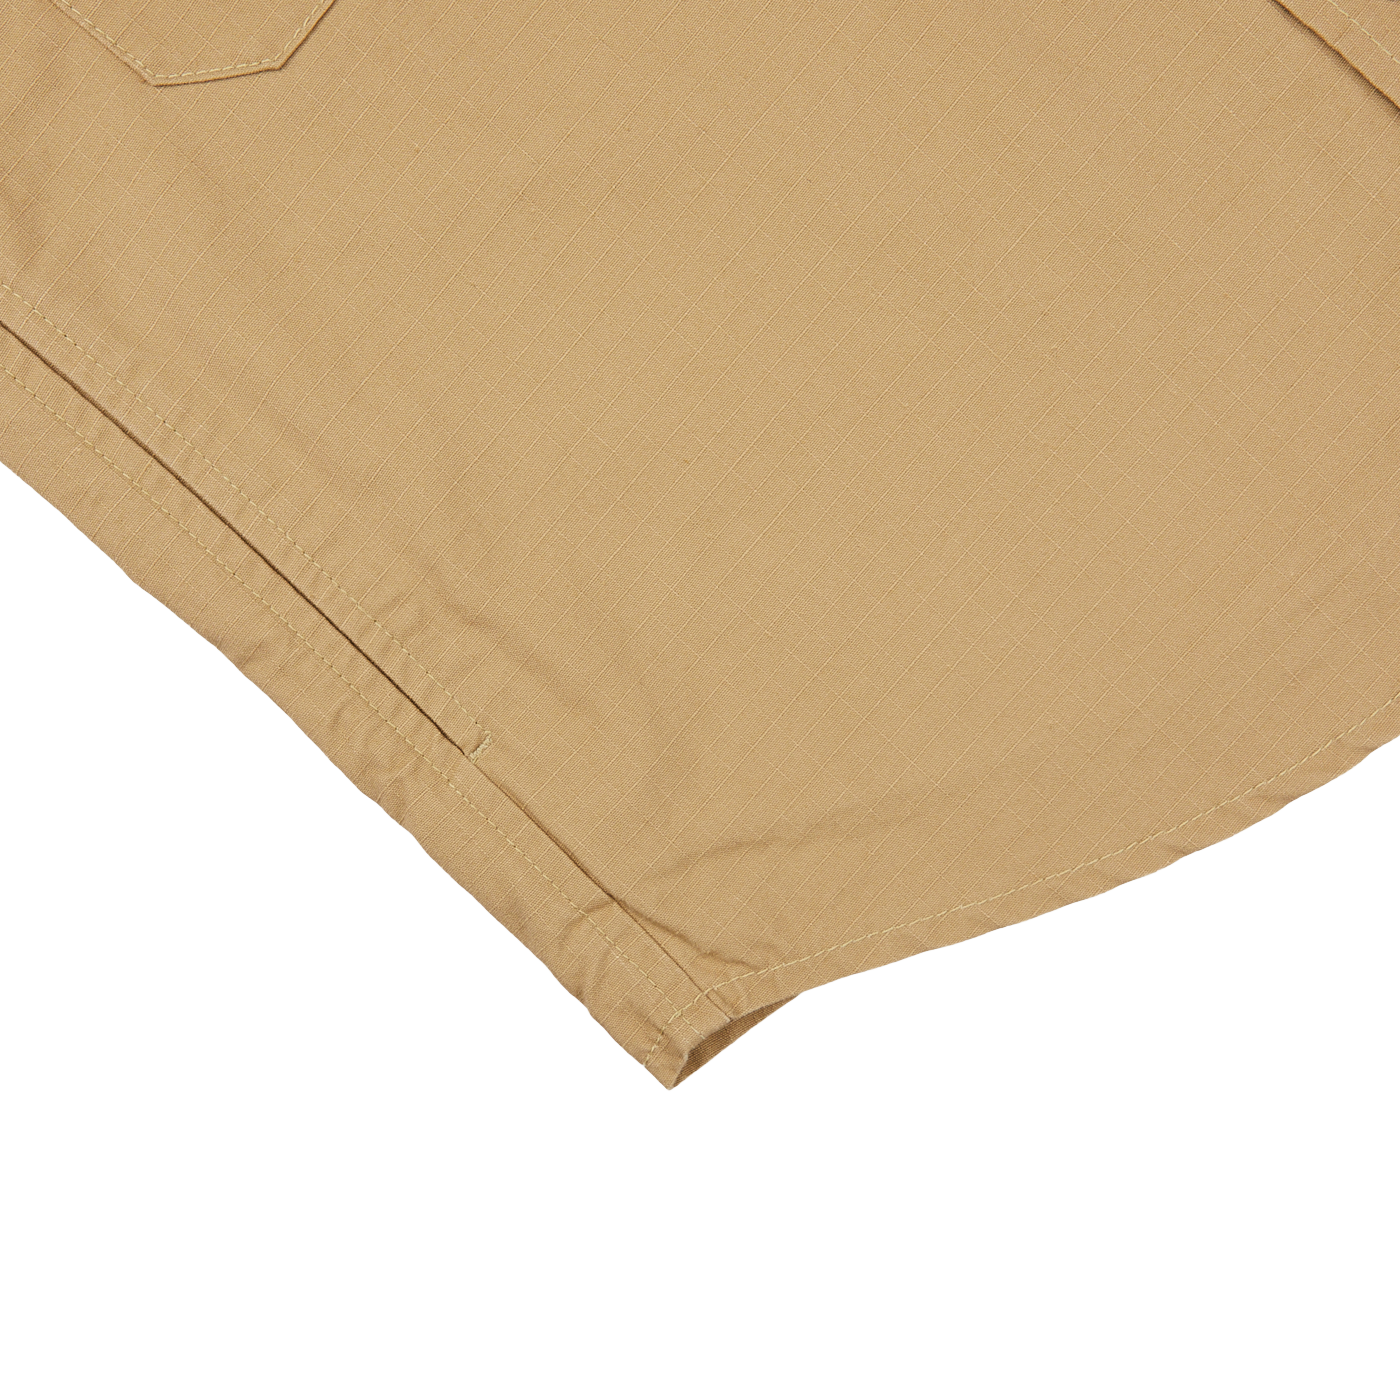 A Camel Beige Cotton Ripstop Country Overshirt with a pocket on the front, inspired by military garments from Manifattura Ceccarelli.